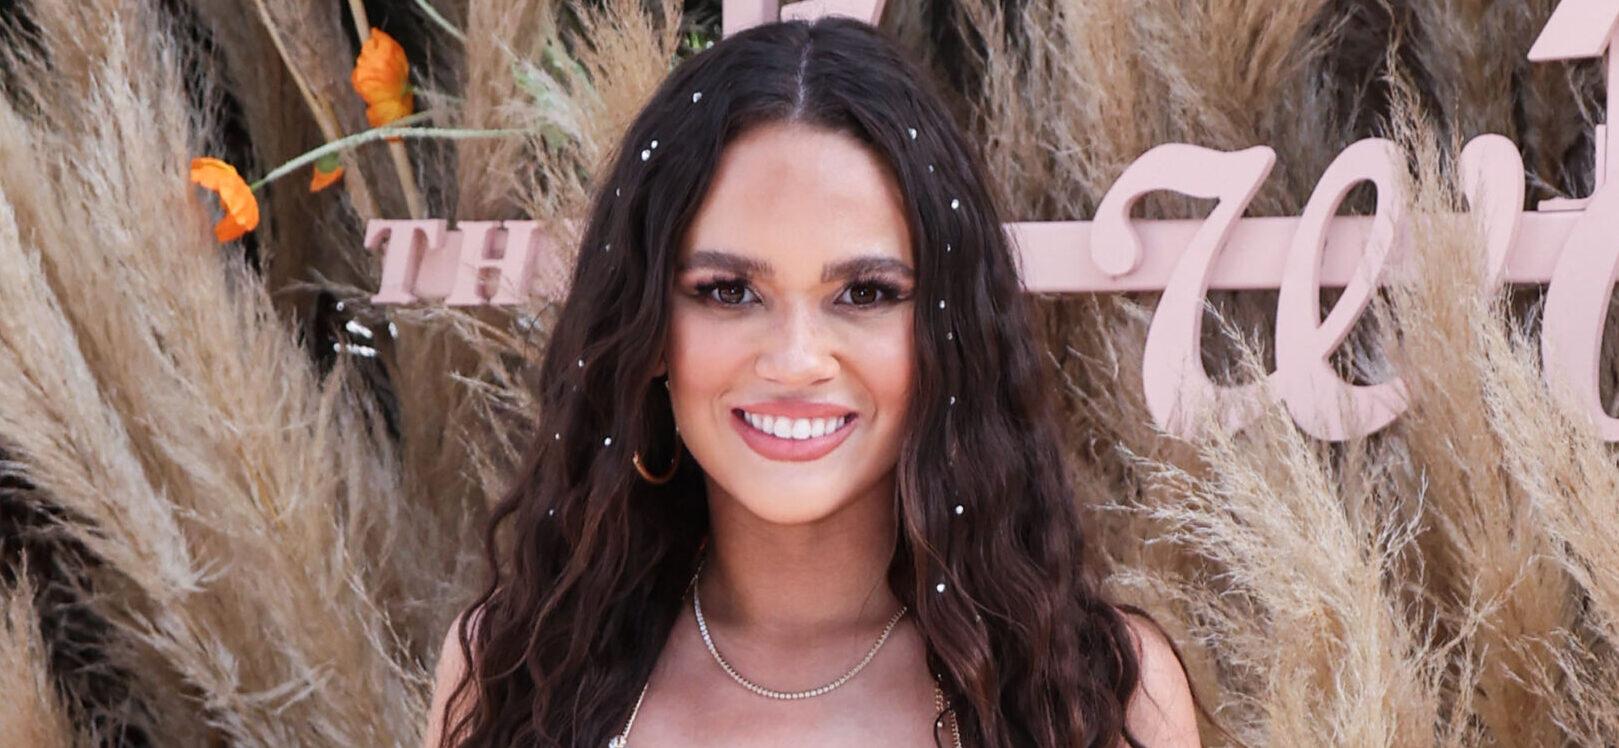 Former Disney Star Madison Pettis Shows Off Her Abs In Tiny Green Bikini